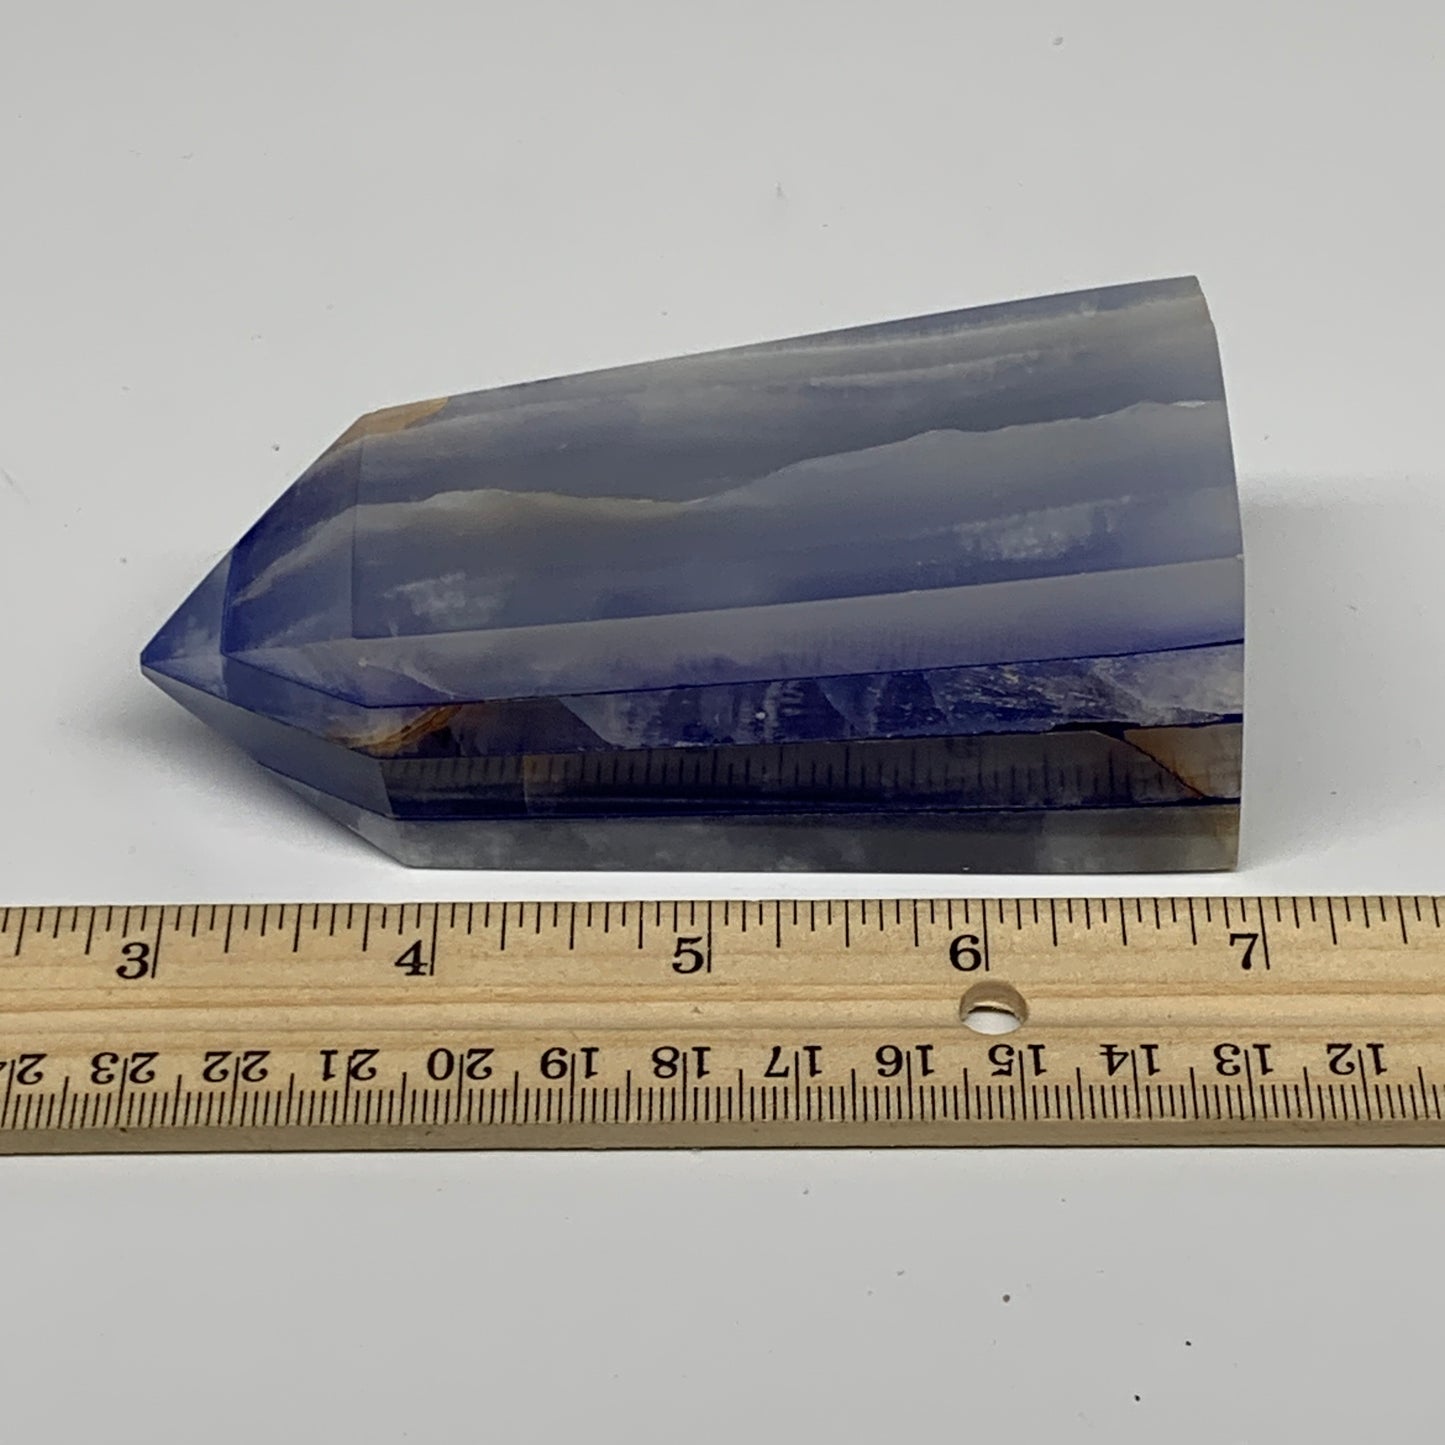 307.3g, 4.1"x1.6"x1.6" Dyed/Heated Calcite Point Tower Obelisk Crystal, B24973